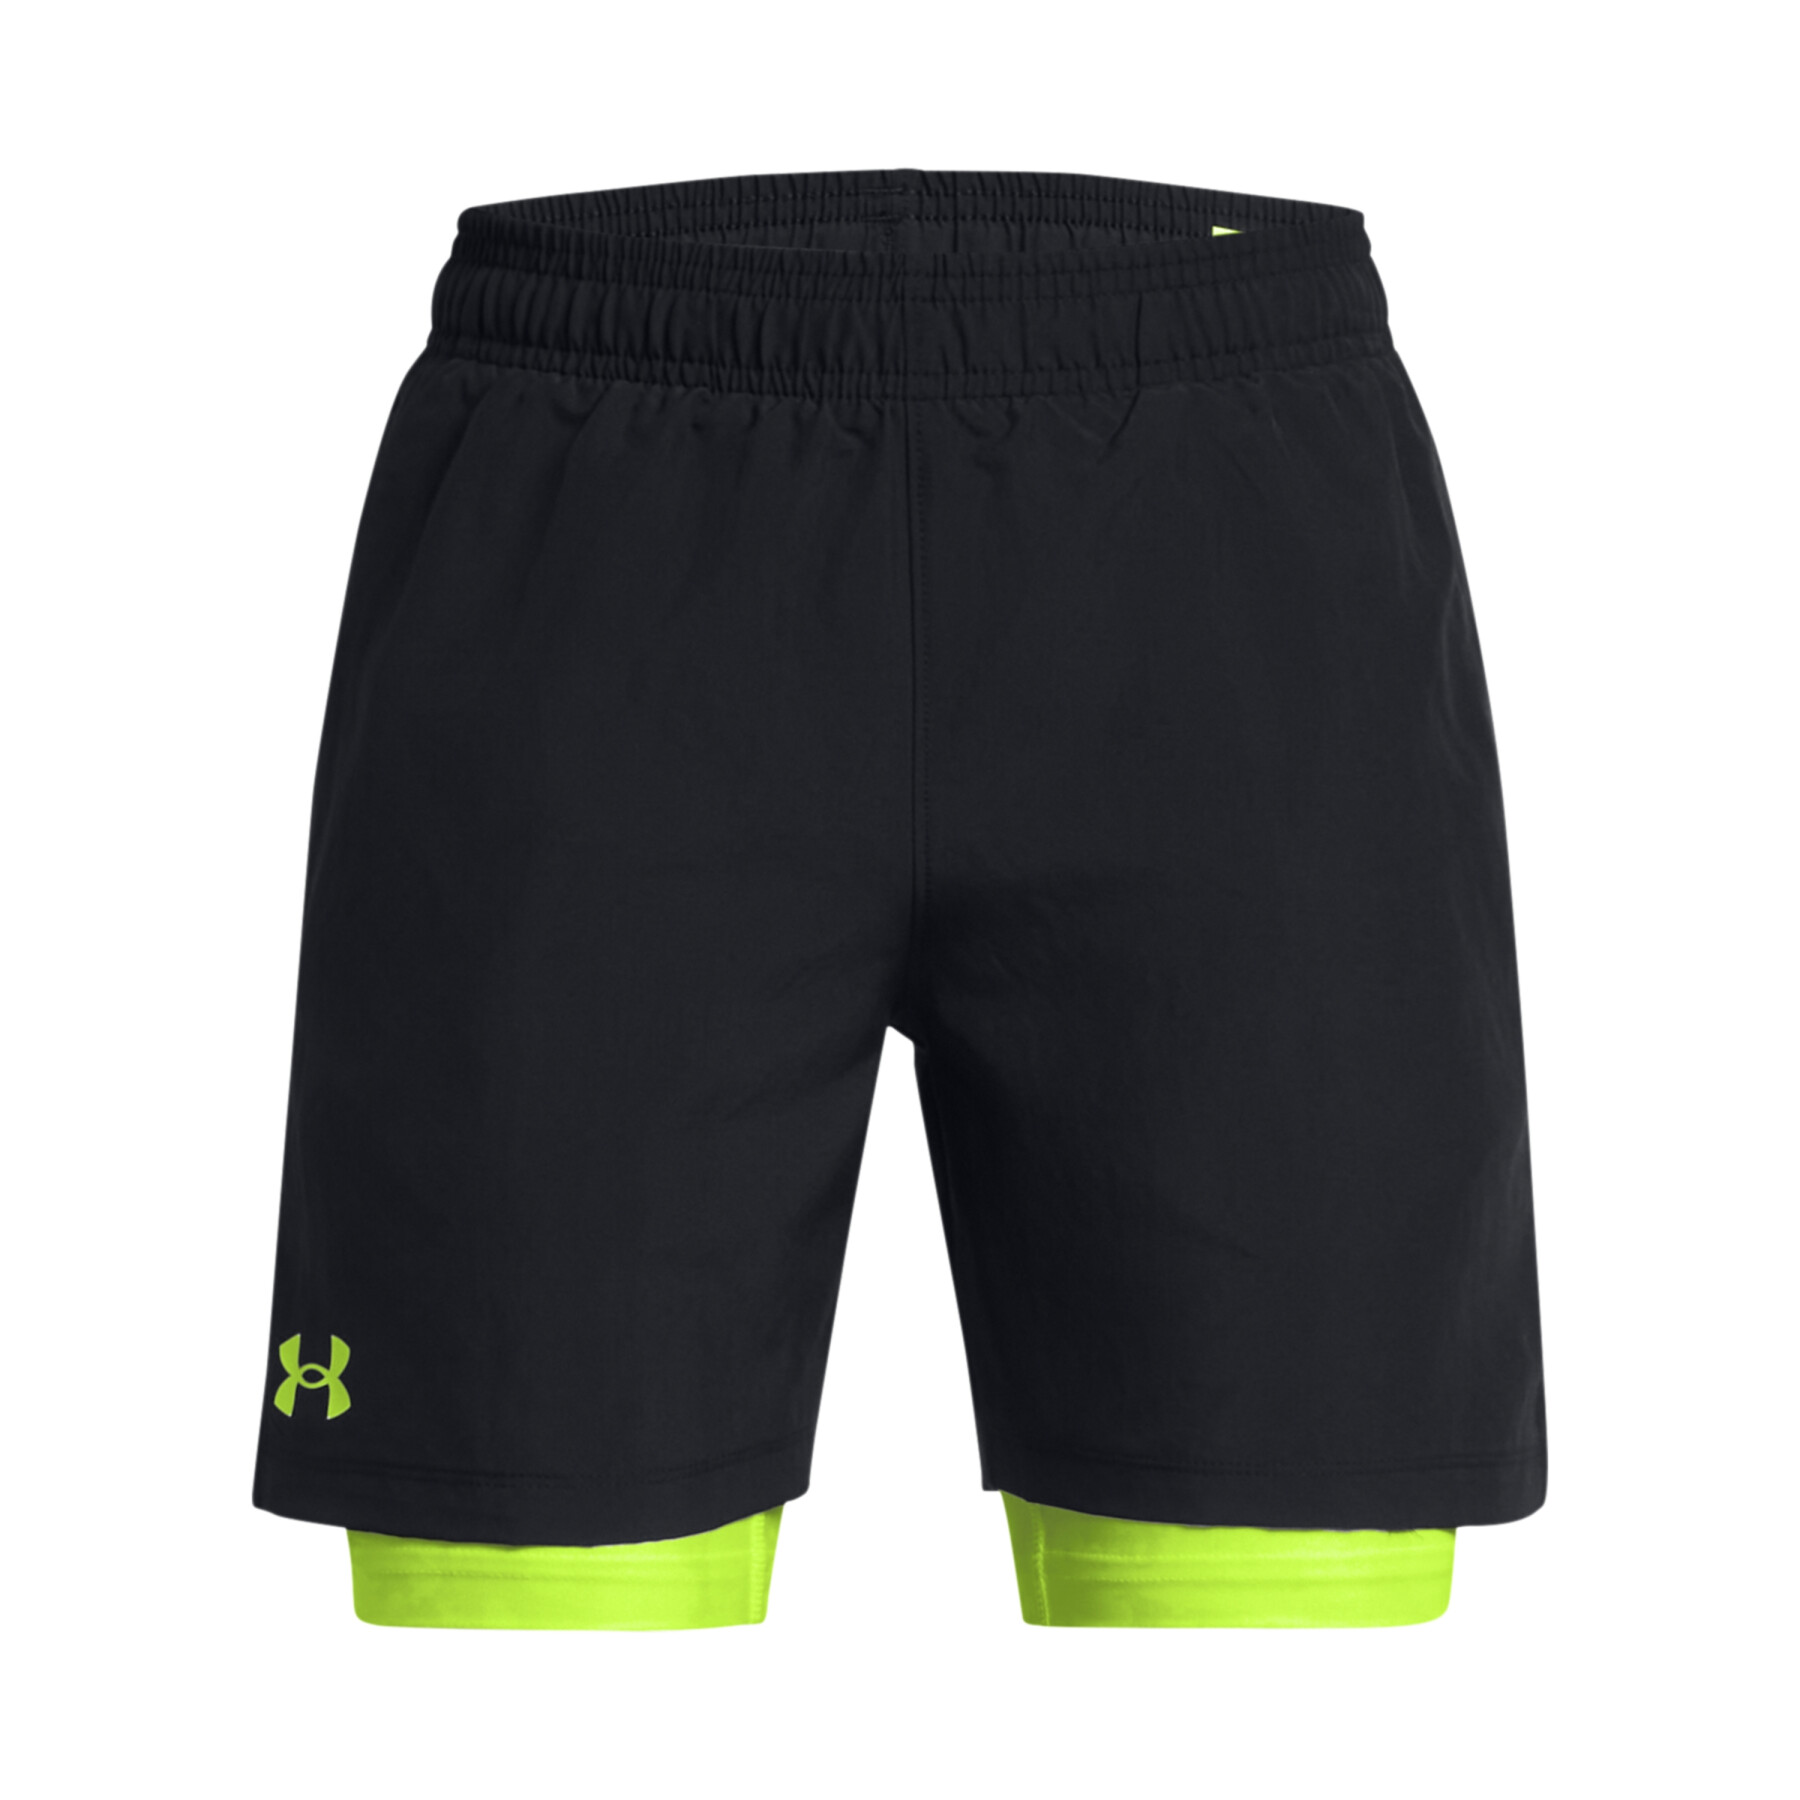 2 in 1 shorts for kids Under Armour Woven